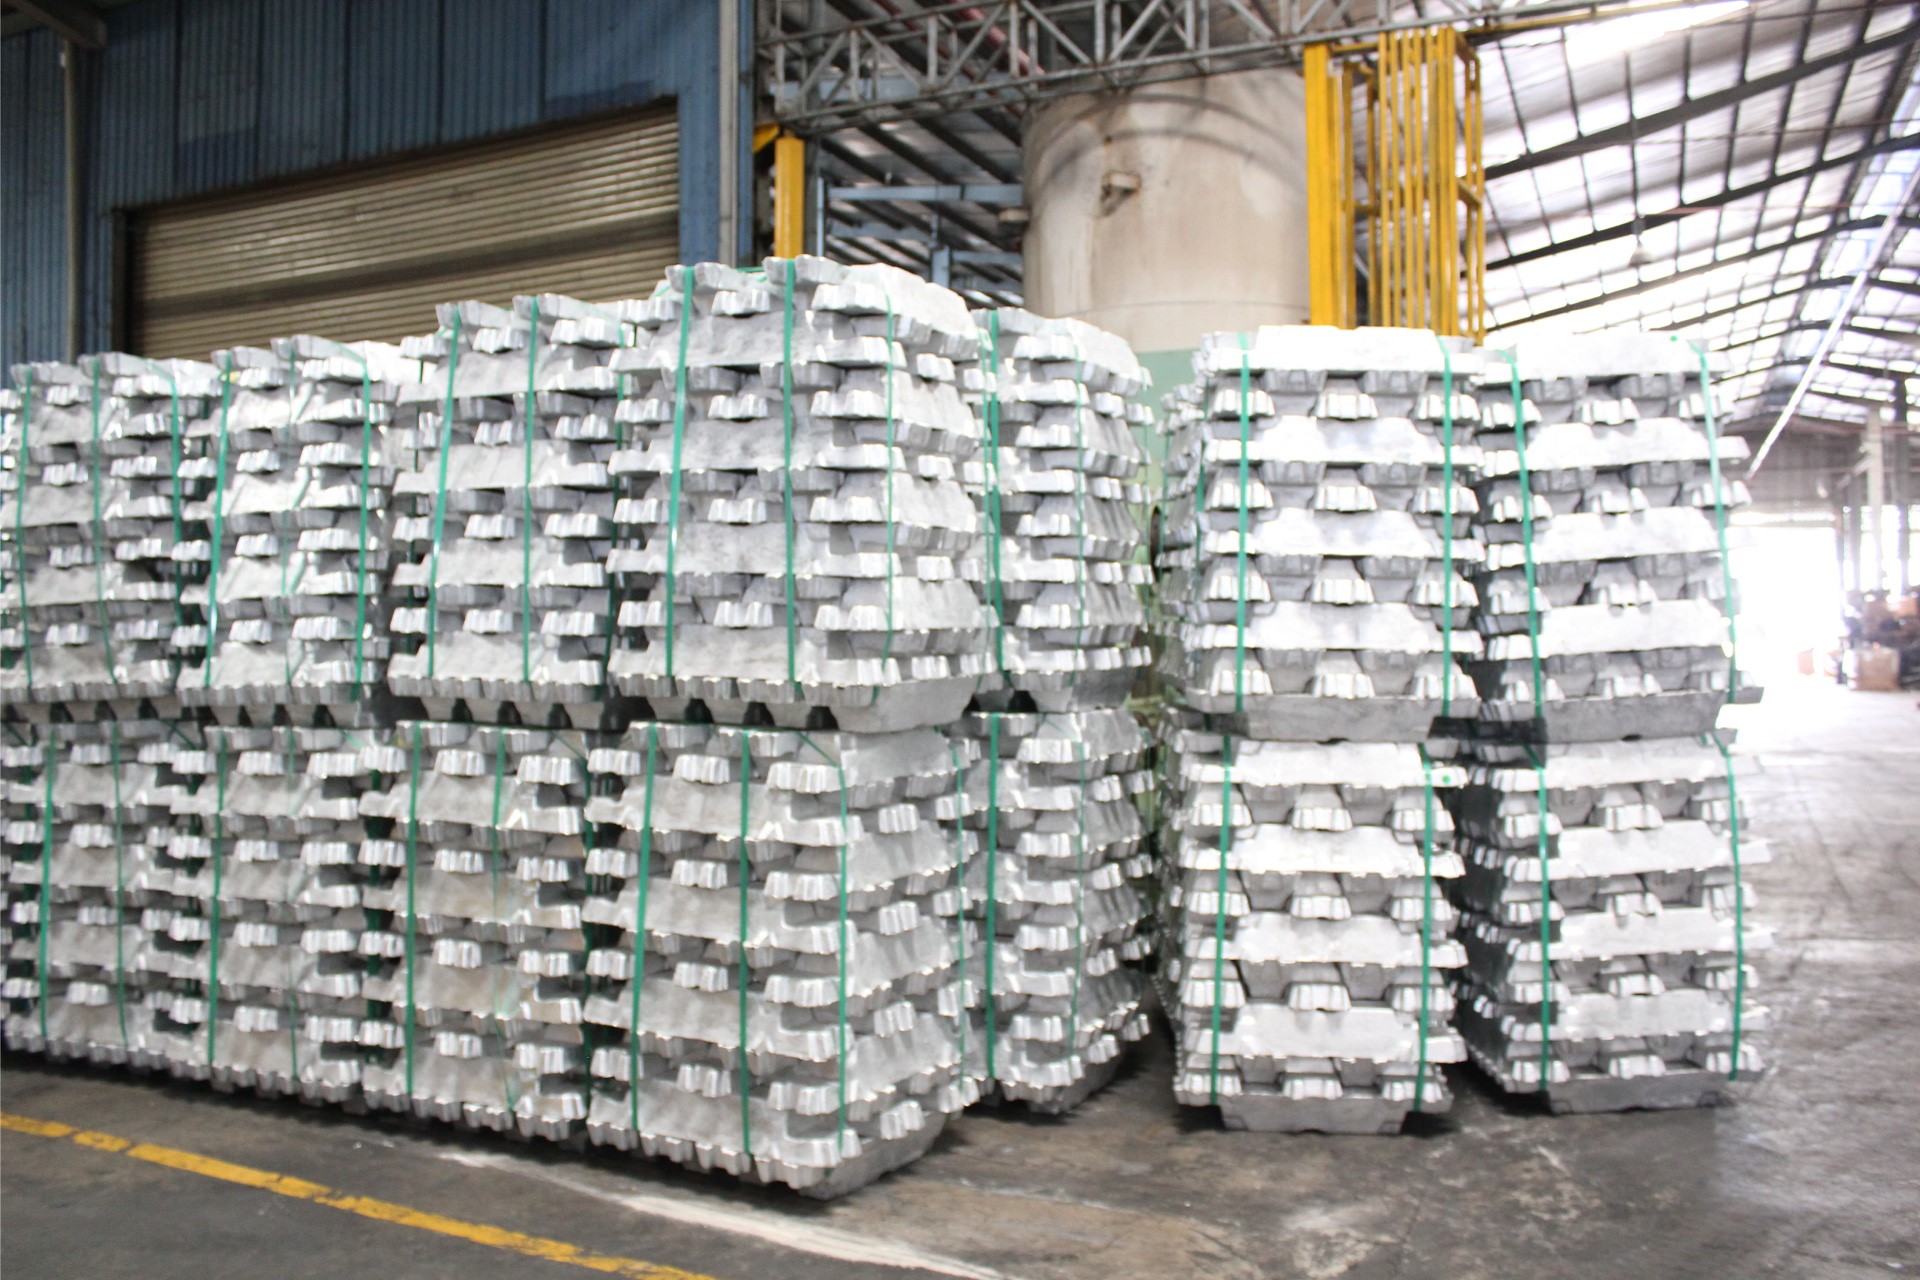 China’s aluminium ingot inventories approached 850,000 tonnes last week as per SMM’s prediction